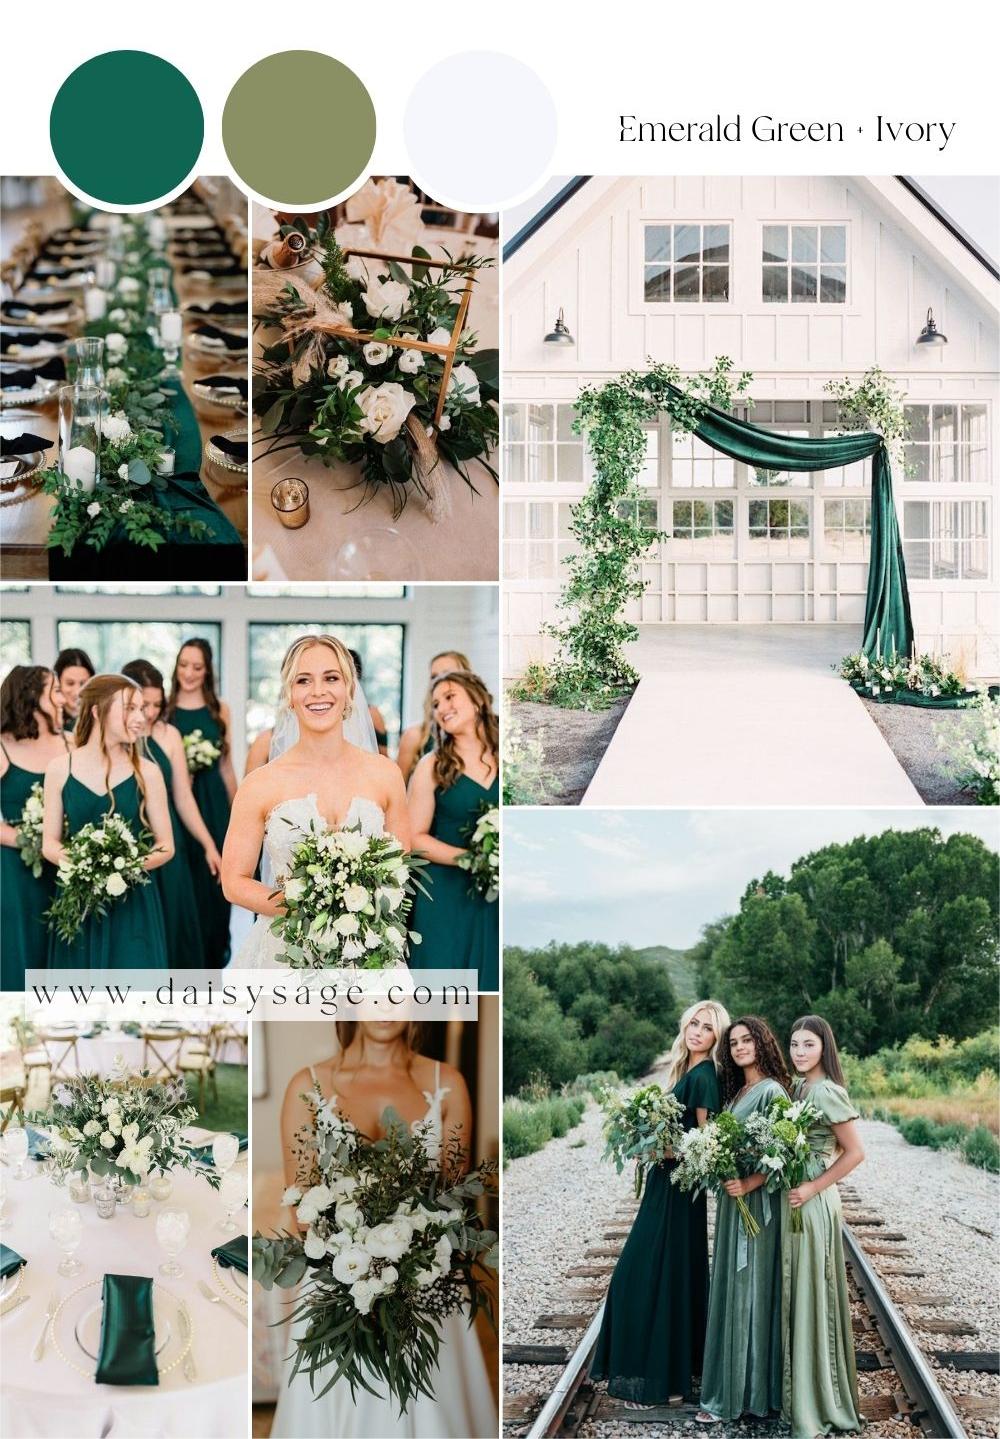 Emerald Green and Ivory Wedding Color Theme